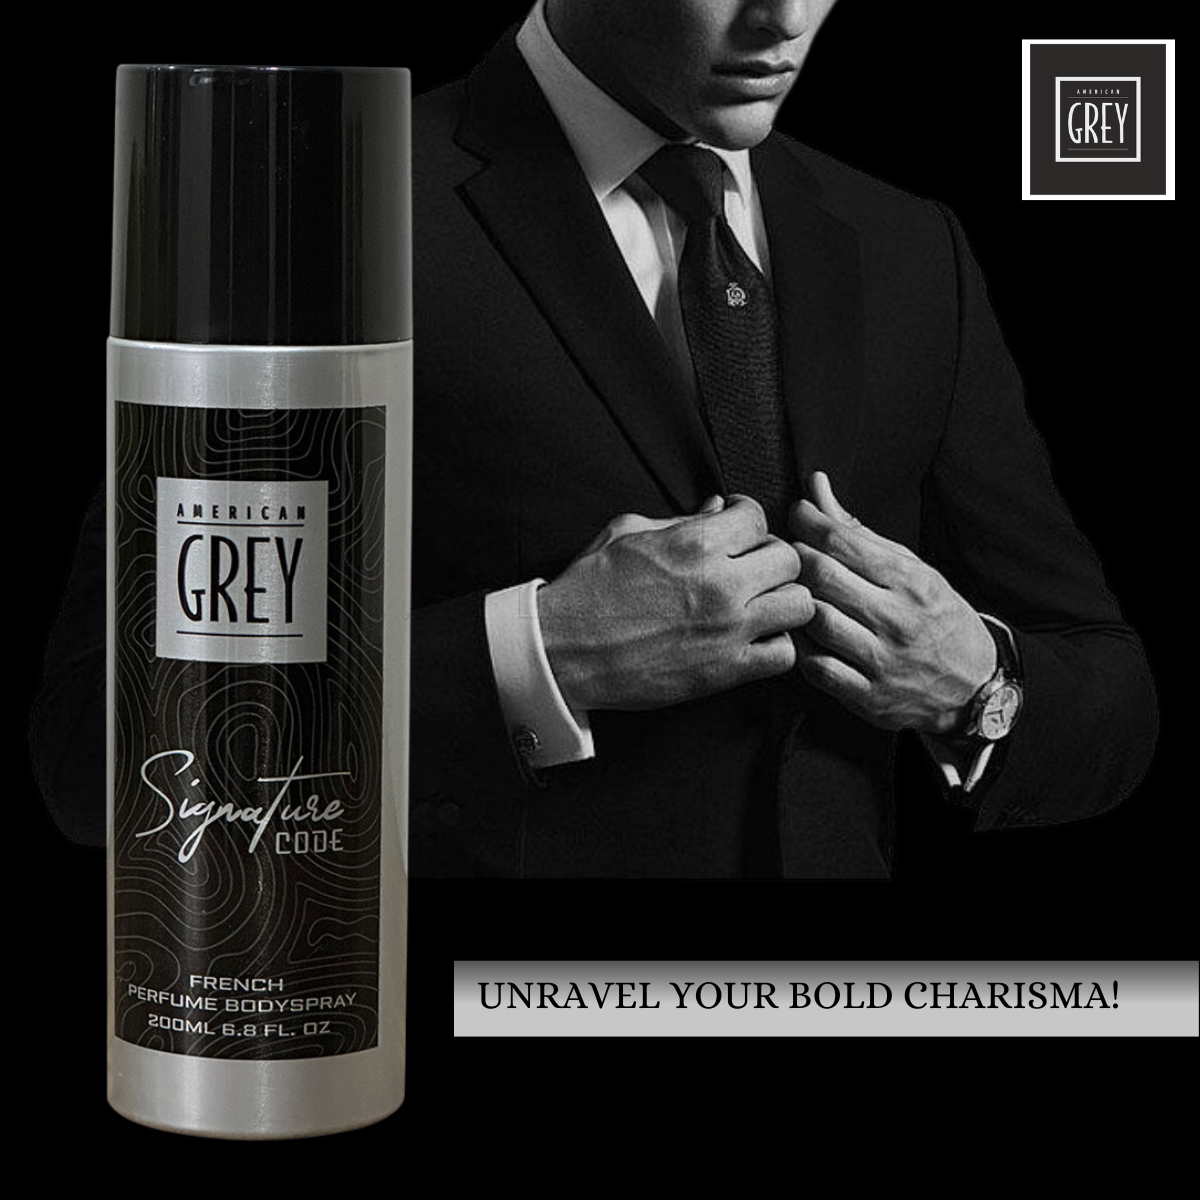 intense fragrance for men, musky and oriental fragrance for men, signature code, men deodorant, deodorant for men at best price in india, powerful fragrance for men, signature code deo for men, signature code men deodorant, buy men deodorant online, best long lasting deo for men in india, best long lasting deo for men, best long lasting deodorant in india for male 2023, best deo spray in India, best deo for men, best men deo brand in India, best musk smelling deo for men,  top rated men deo, men grooming essential, men fragrance for winter season, best deo for cold weather, popular winter deodorant for men, best smelling deo for evening wear